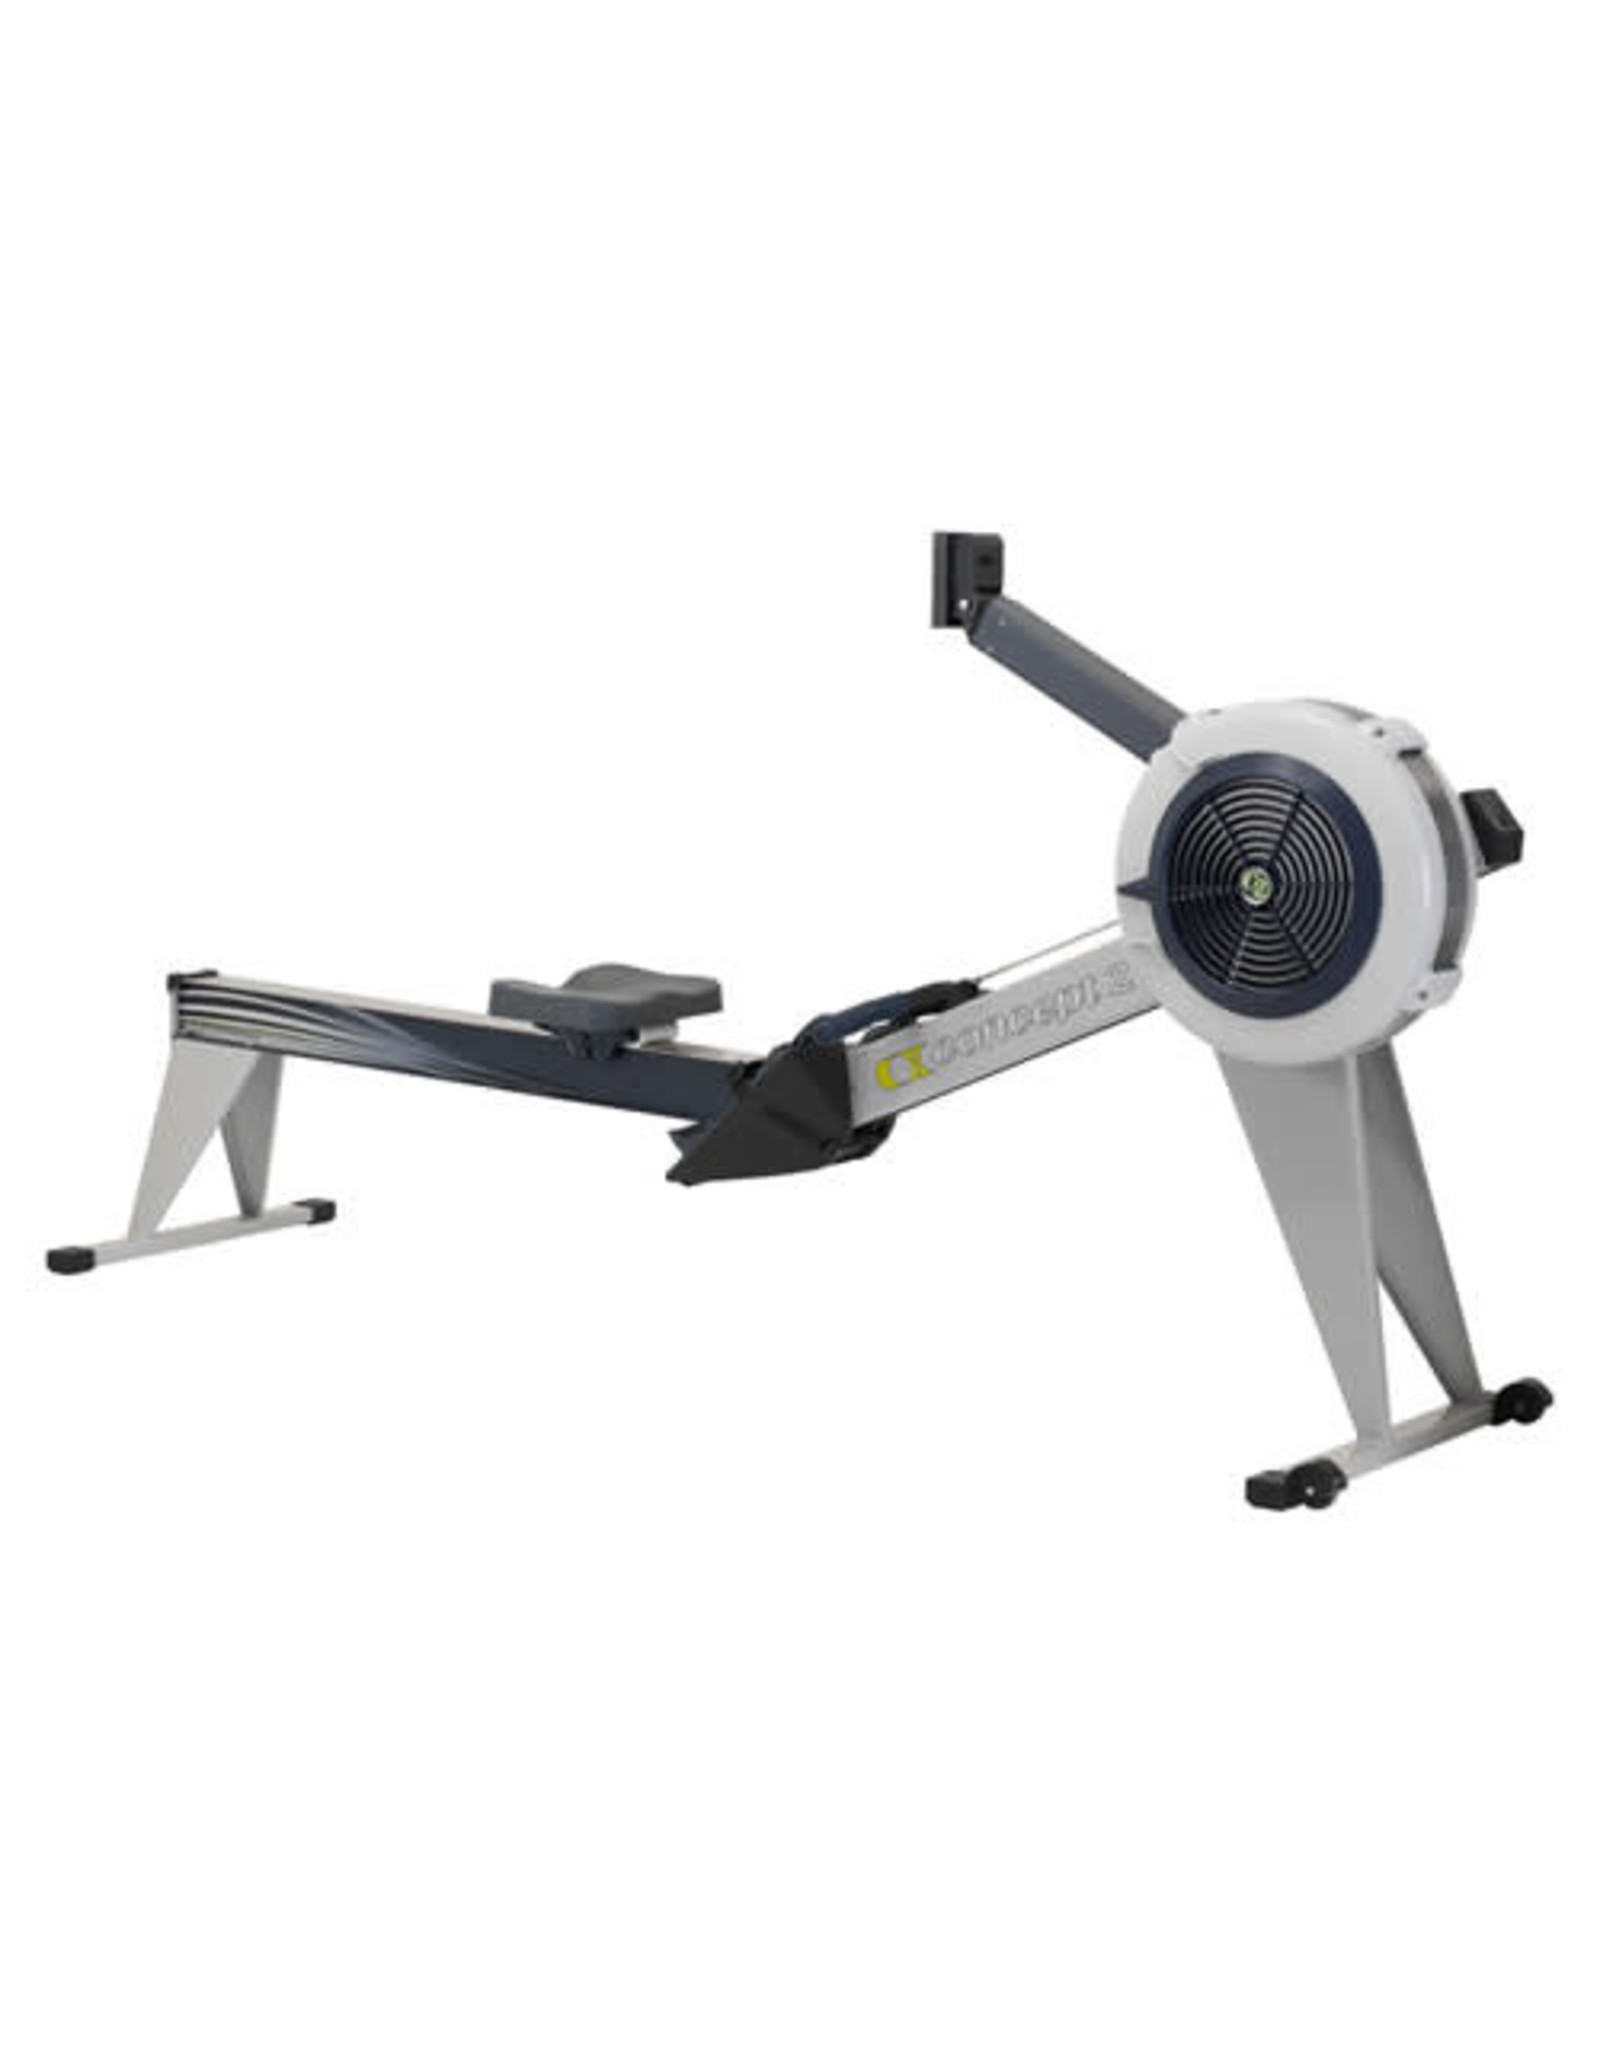 Concept II Concept 2 Model E Indoor Rowing Machine with PM5